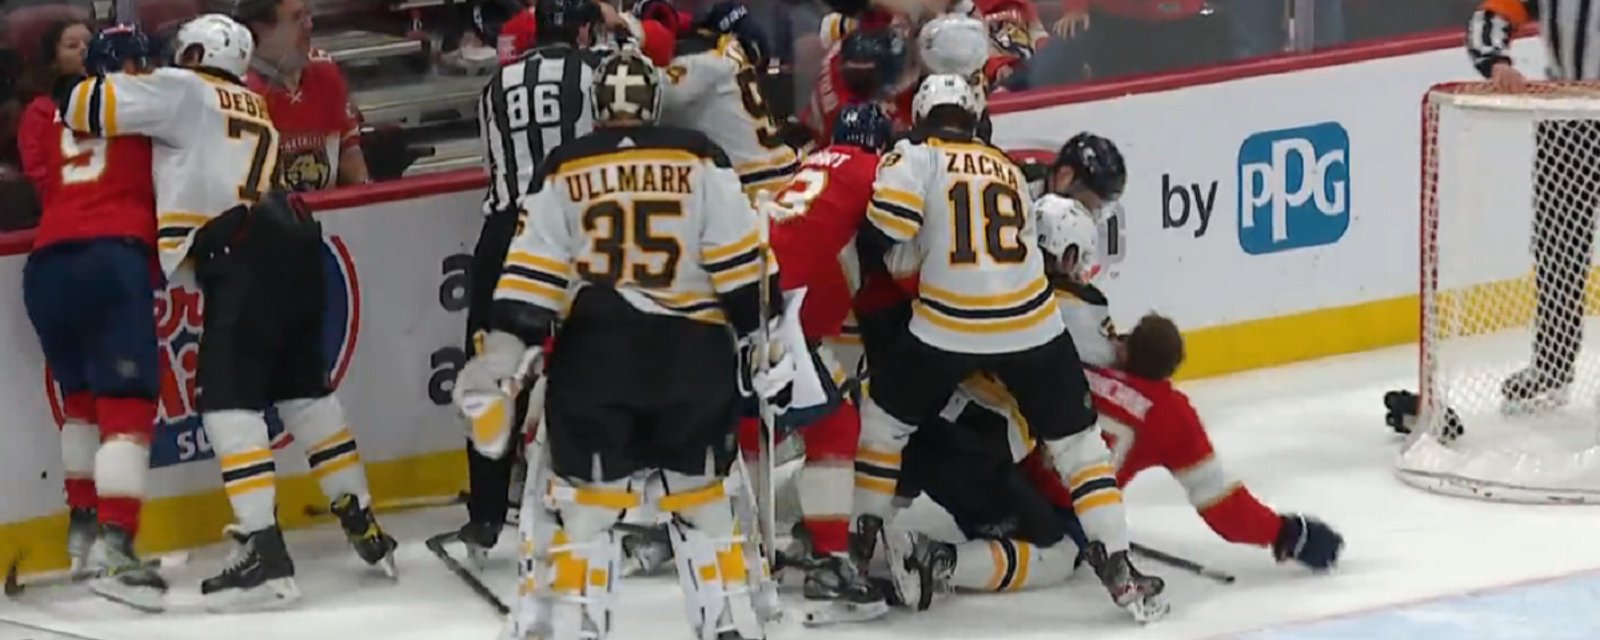 Tkachuk goes after Ullmark and all hell breaks loose in Game 4!